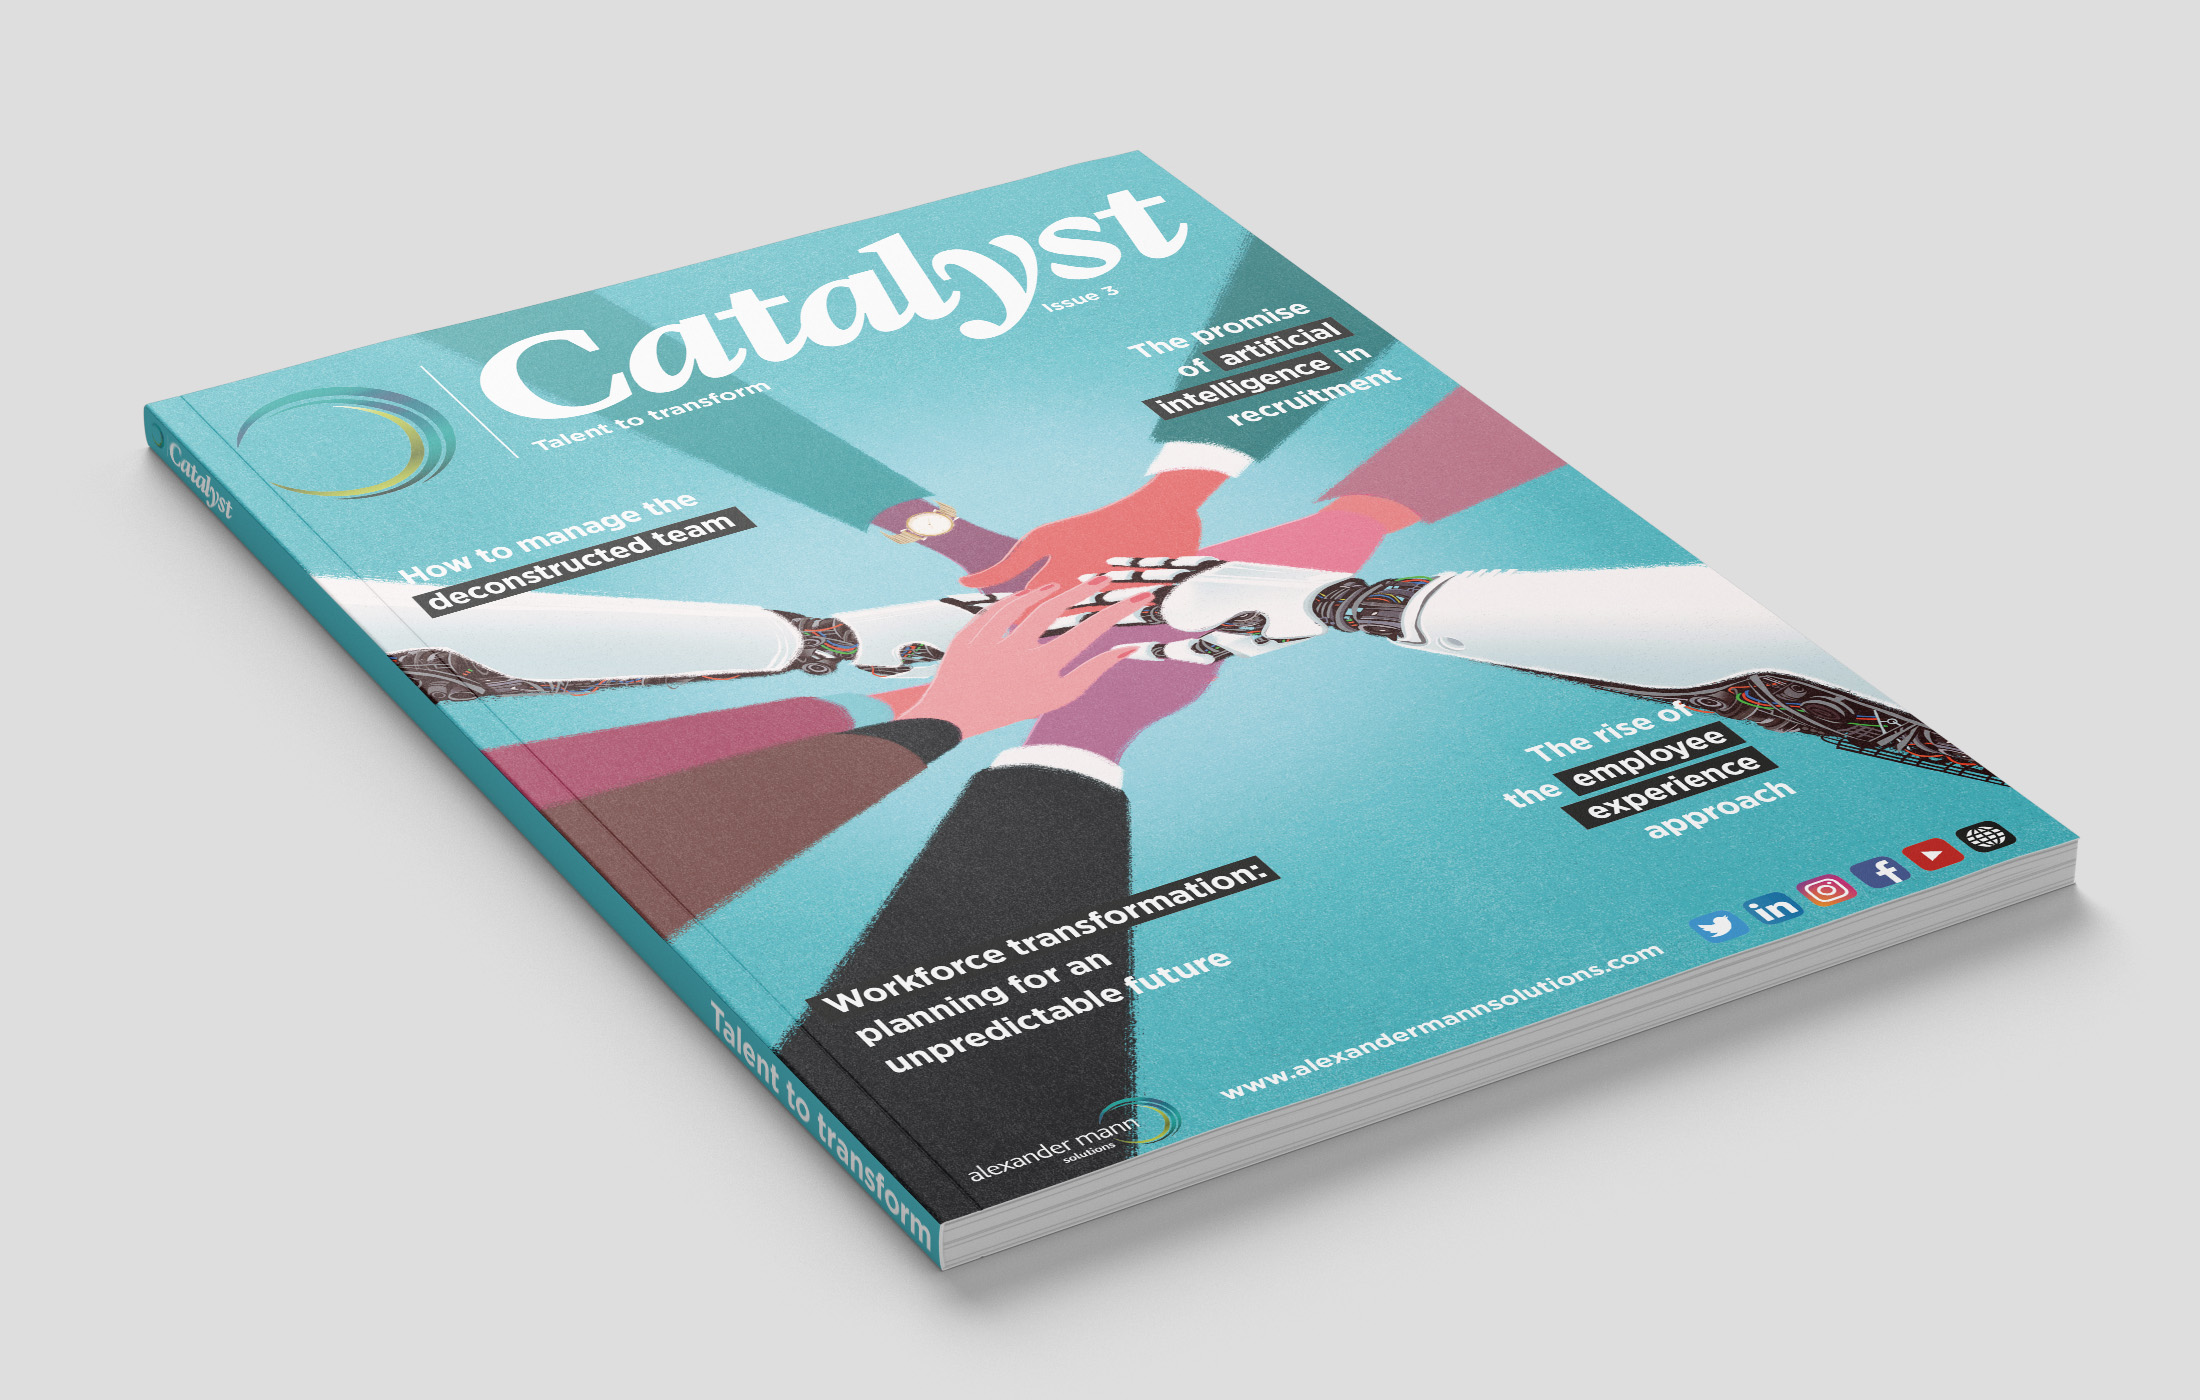 Catalyst Cover